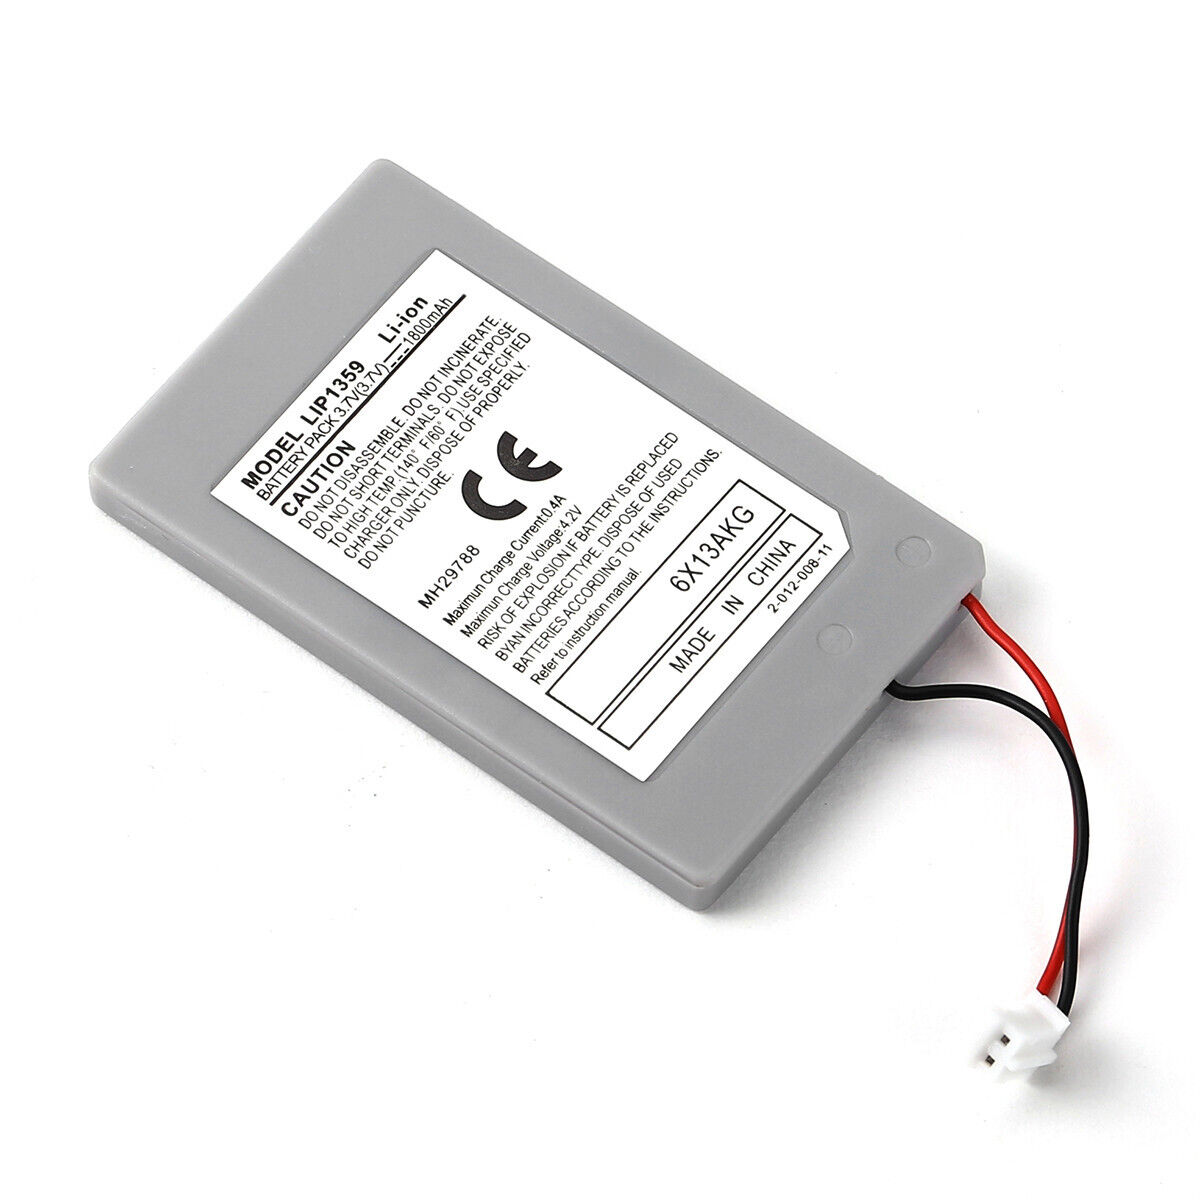 New 1800mAh Rechargeable Battery For Sony Playstation 3 PS3 Wireless Controller Unbranded - фотография #10